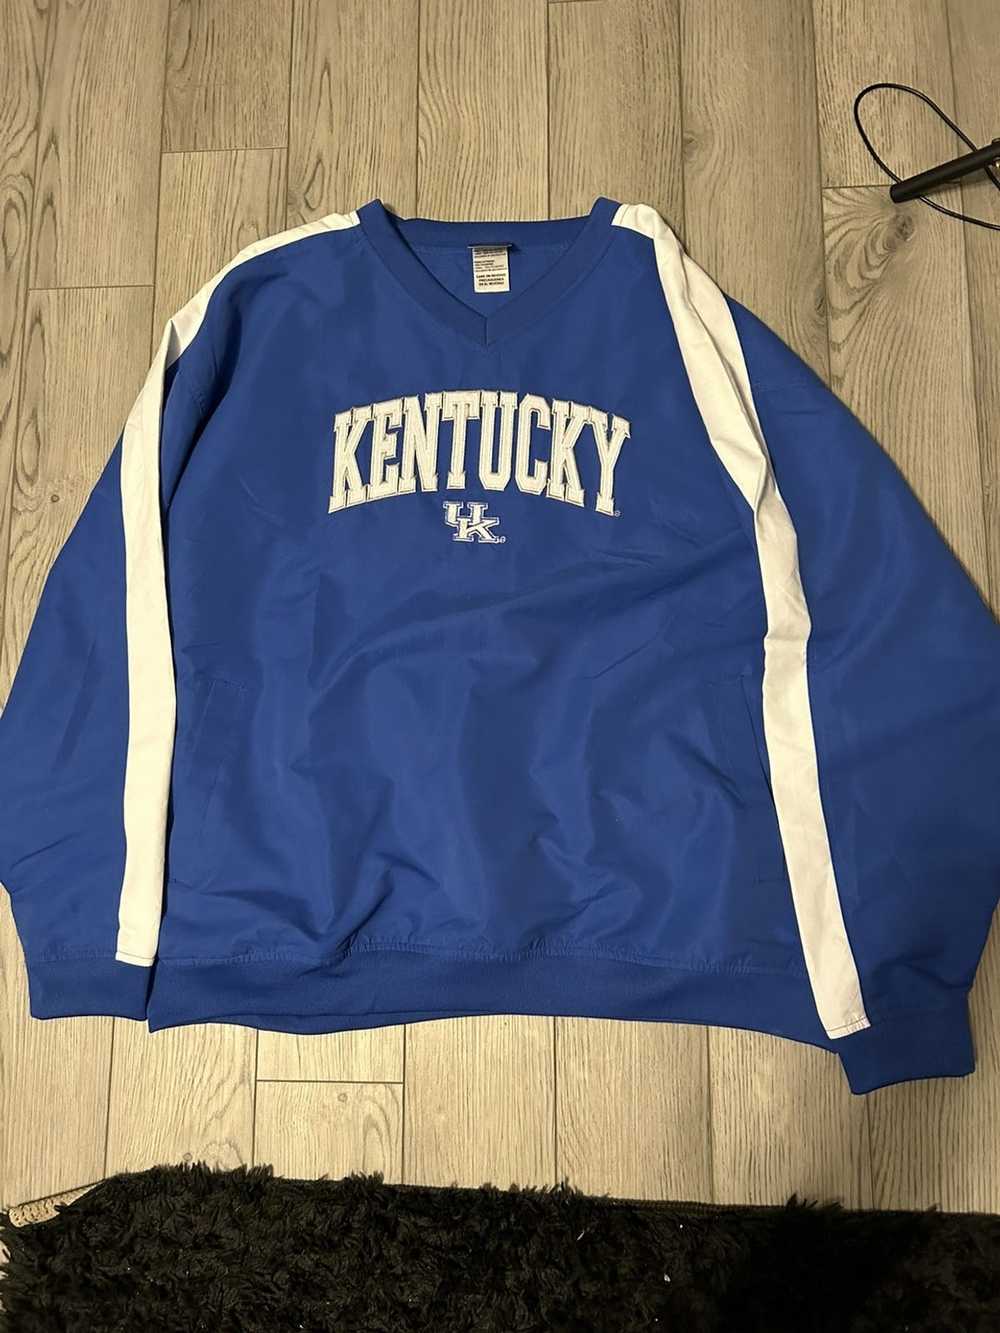 Vintage Kentucky pullover - image 1